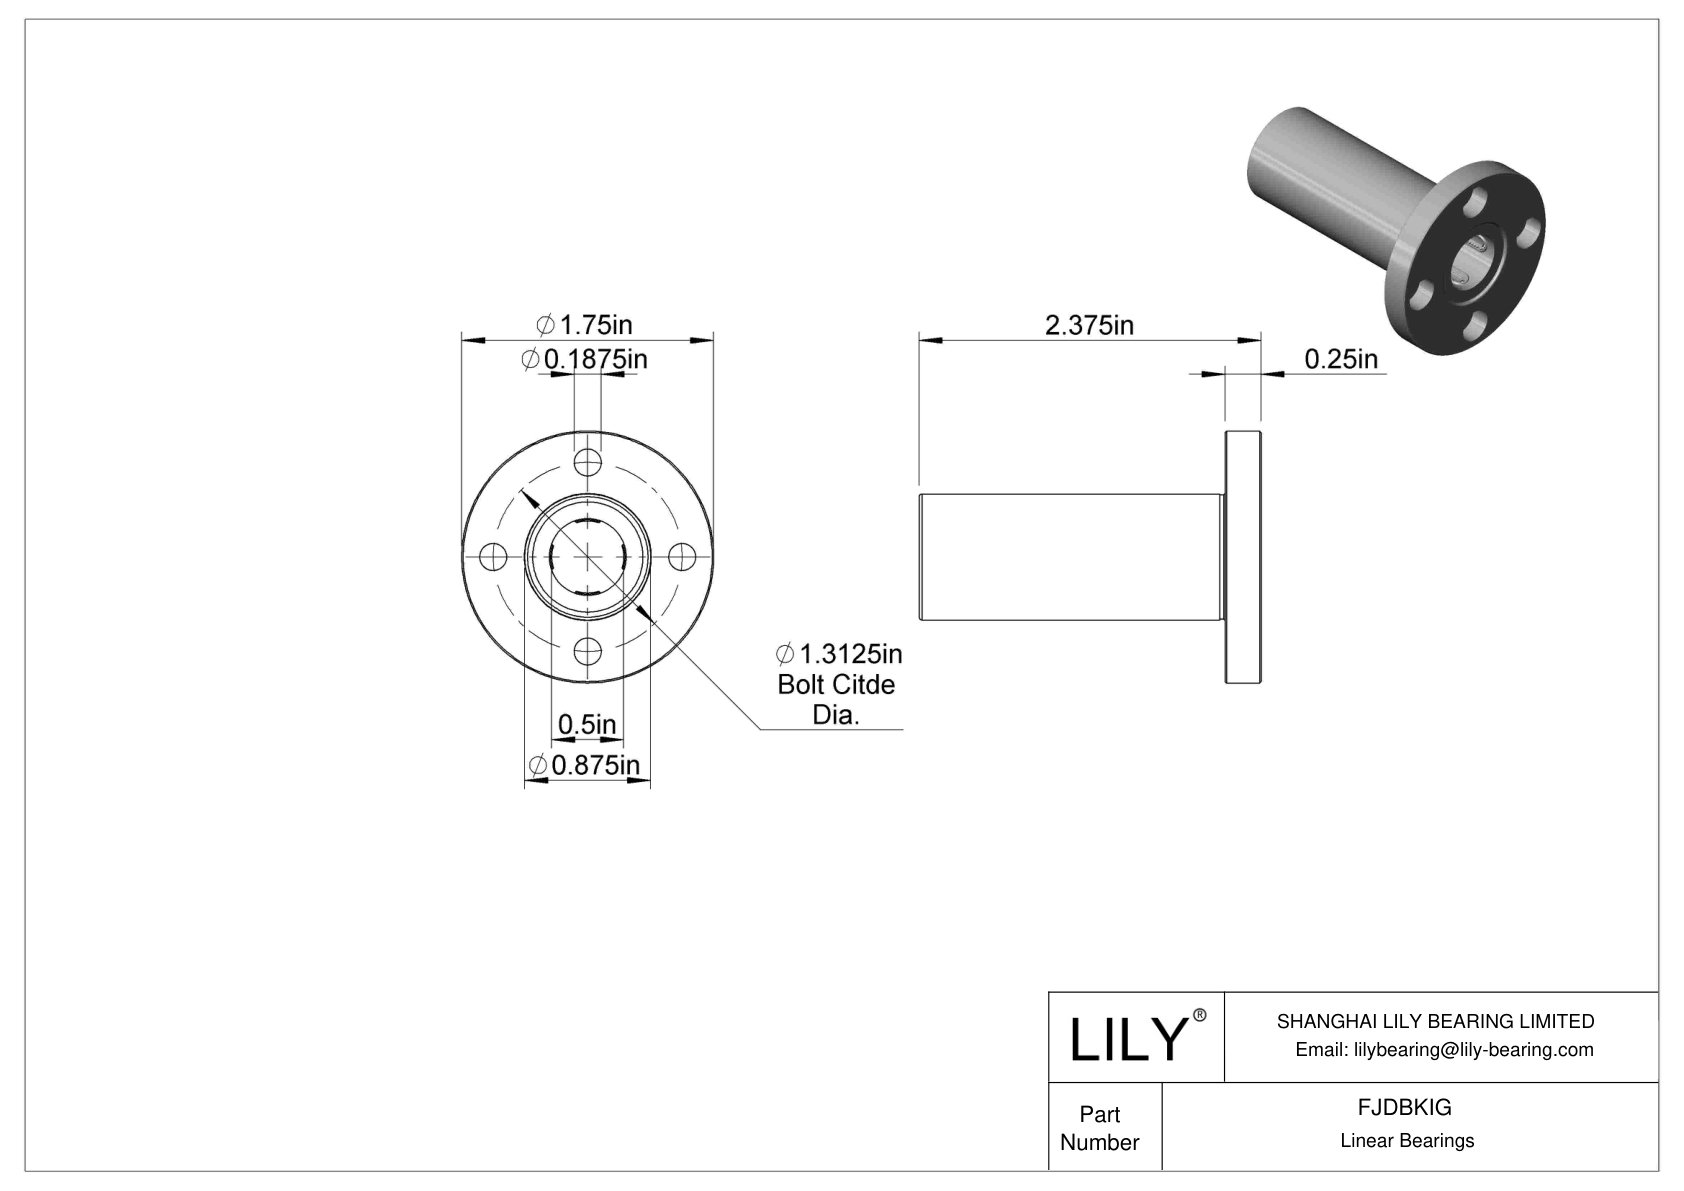 FJDBKIG Corrosion-Resistant Flange-Mounted Linear Ball Bearings cad drawing